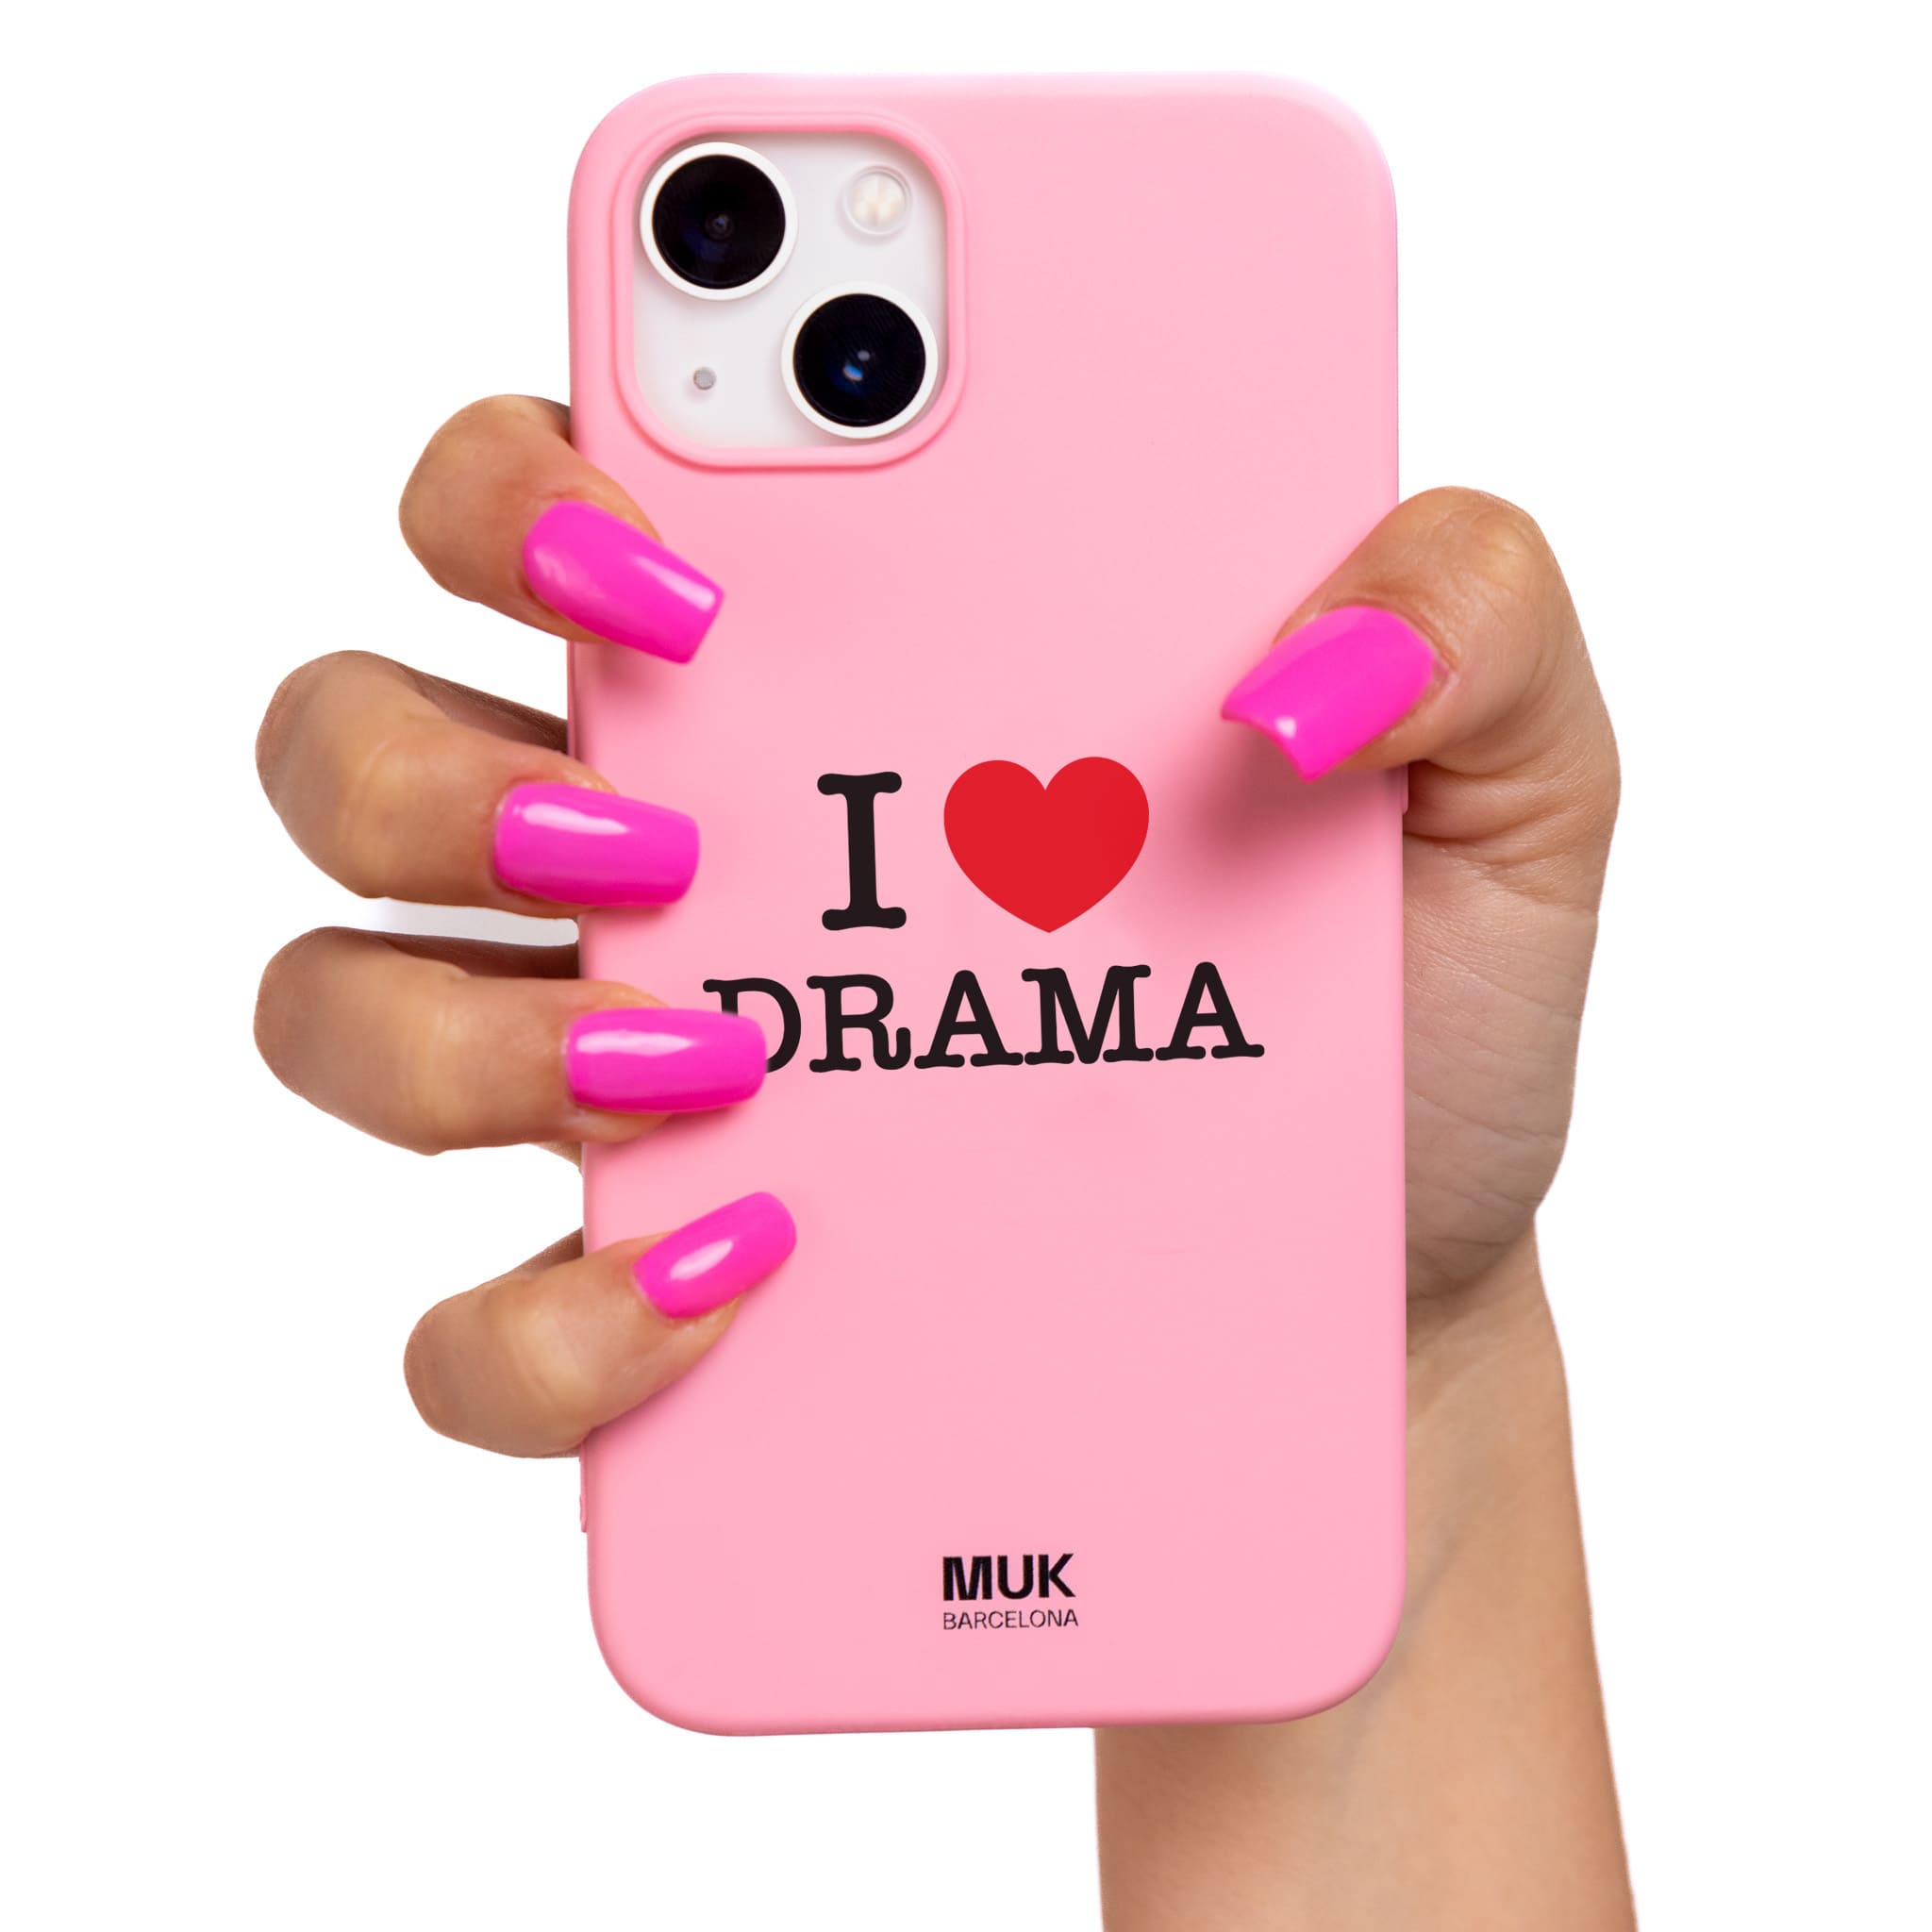 Pink TPU  case with personalized phrase "I LOVE ..."
